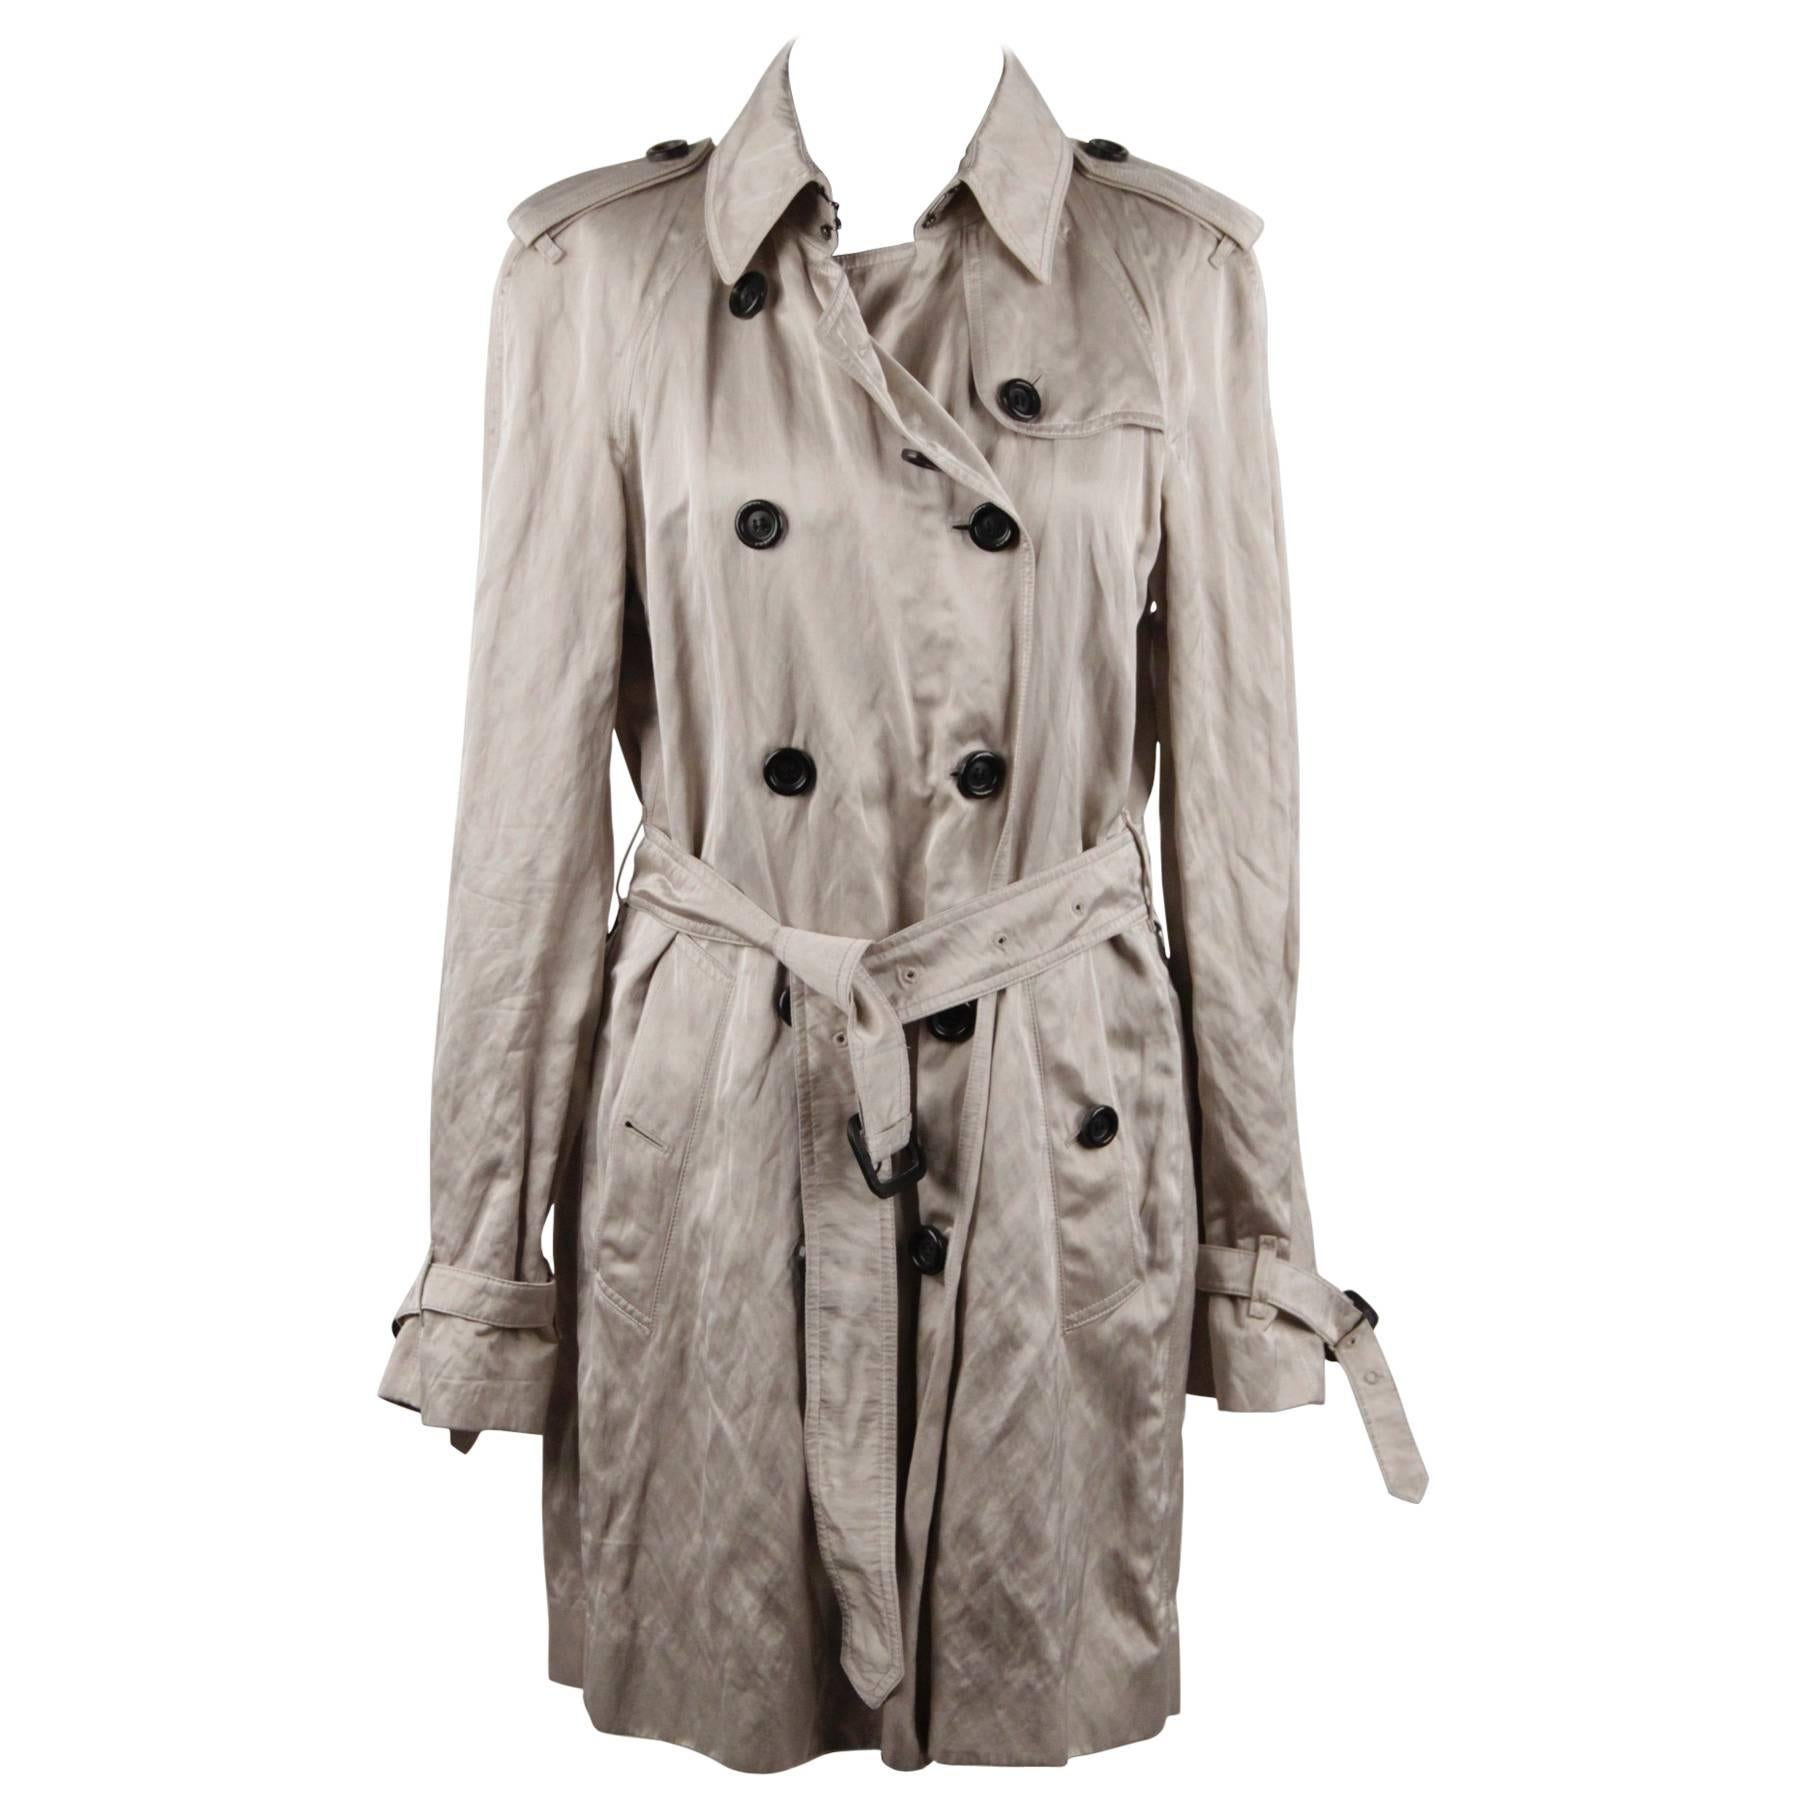 BURBERRY Beige Washed Viscose Satin TRENCH COAT Double Breasted w/ BELT 8